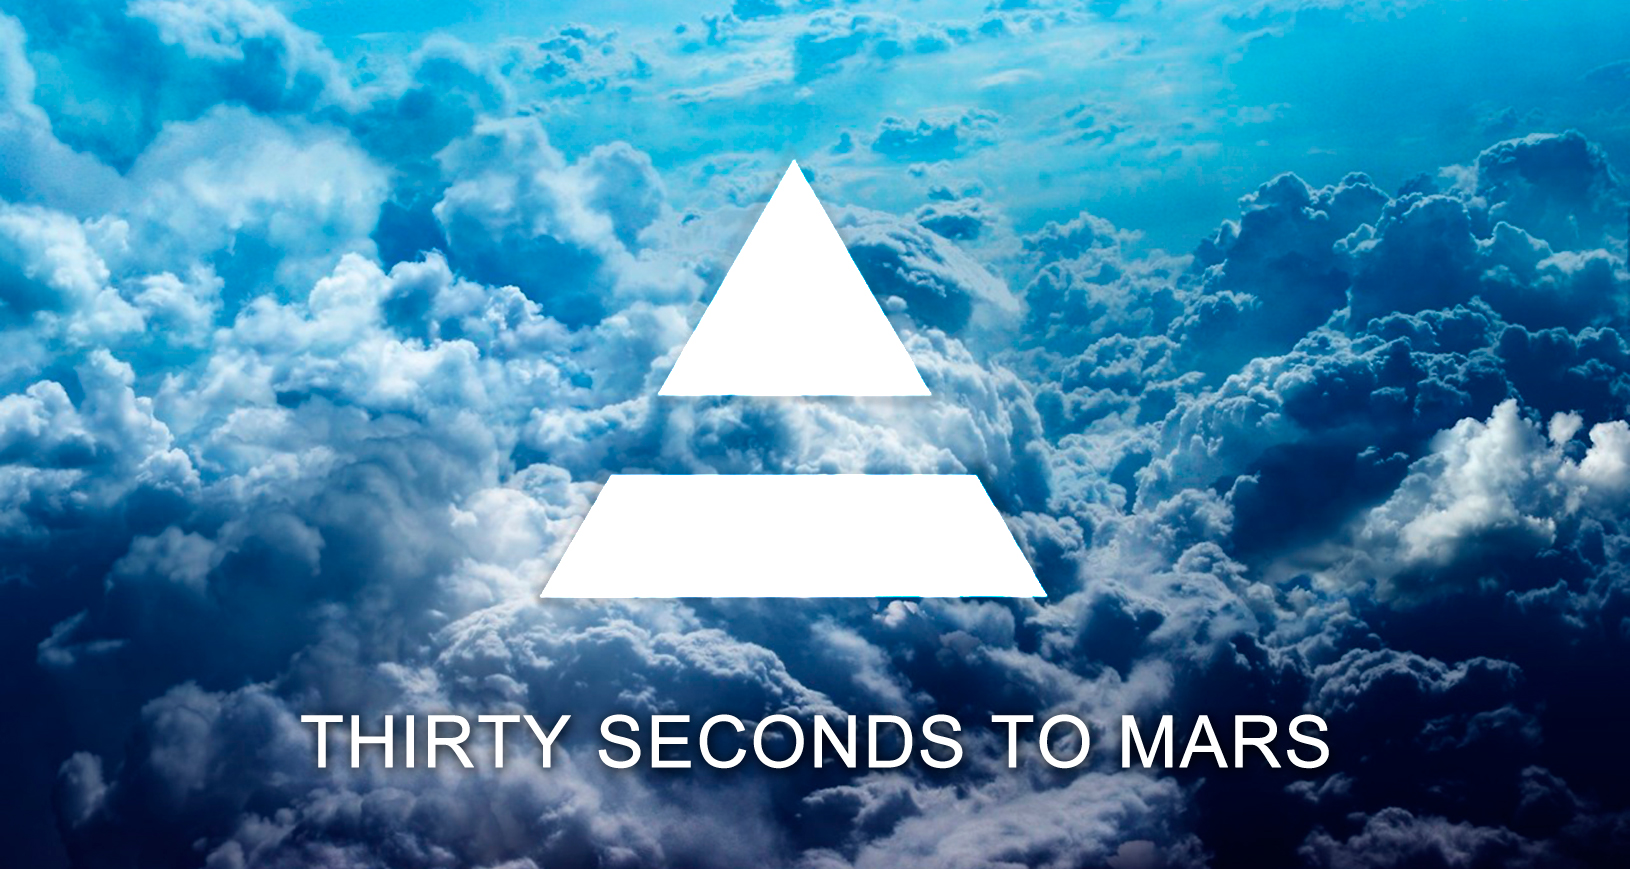 Free Download Thirty Seconds To Mars By Xmdctrue On [1630x869] For Your Desktop Mobile And Tablet